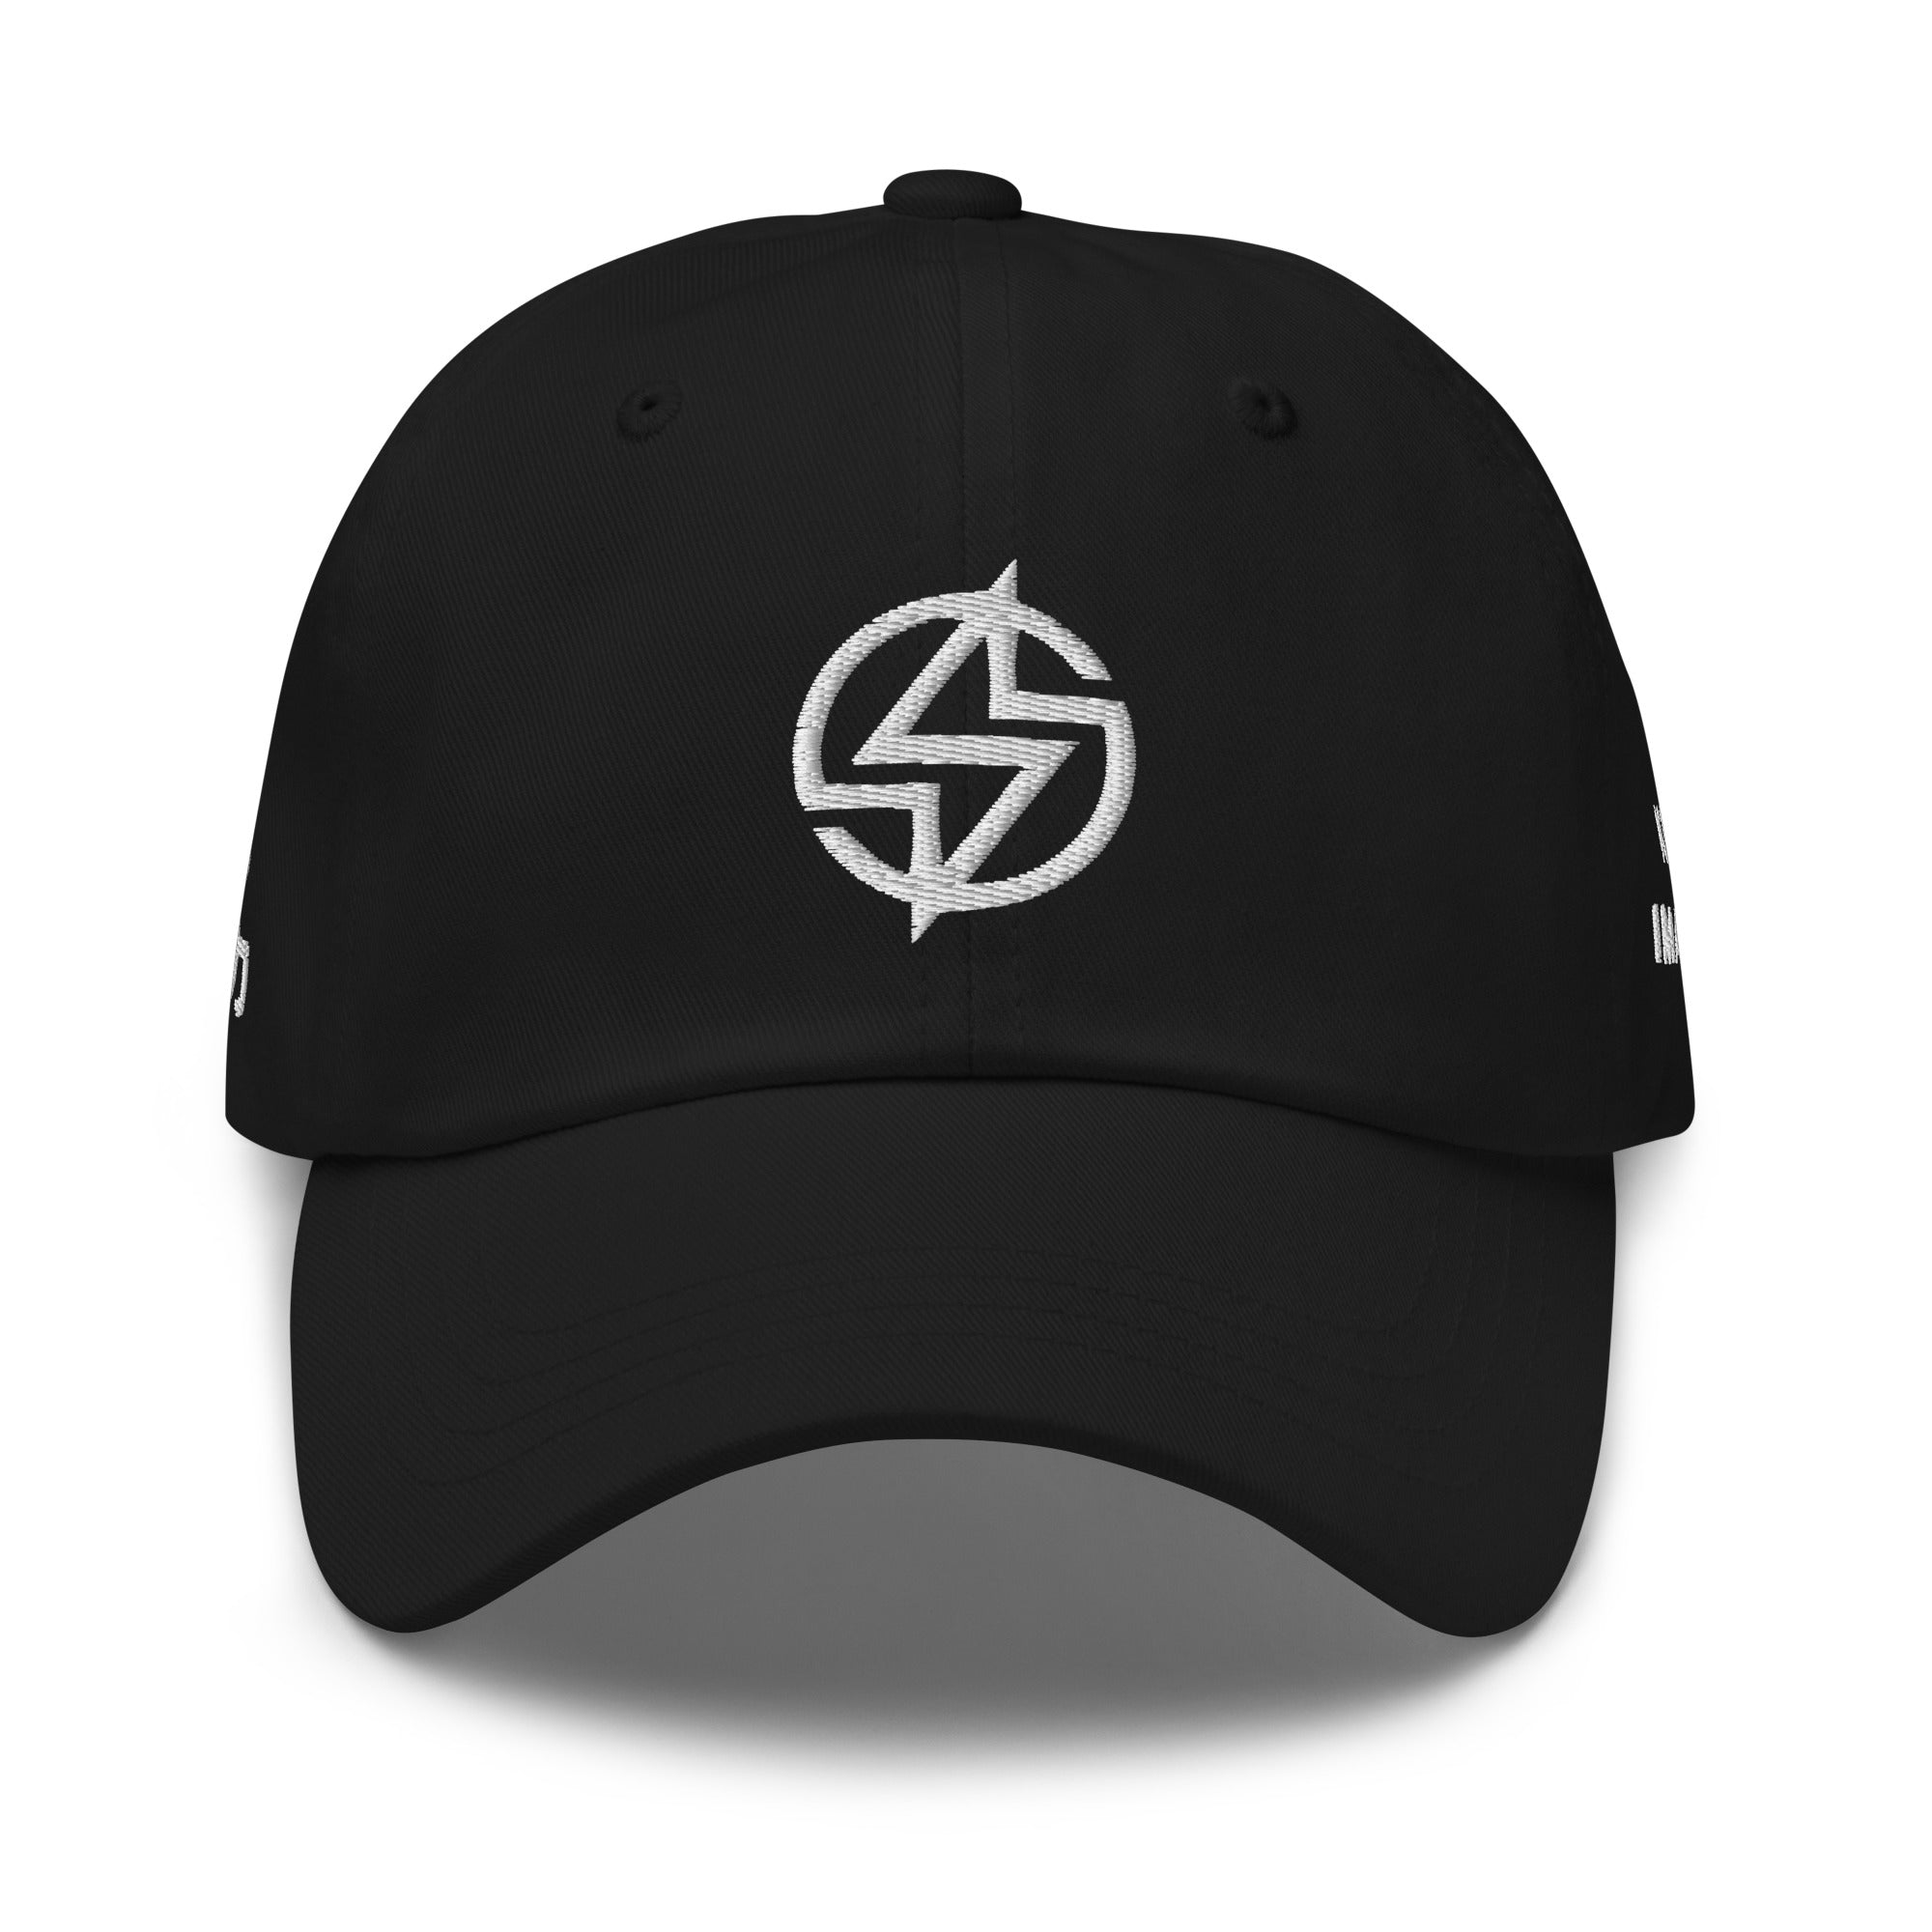 Black dad hat with white embroidery